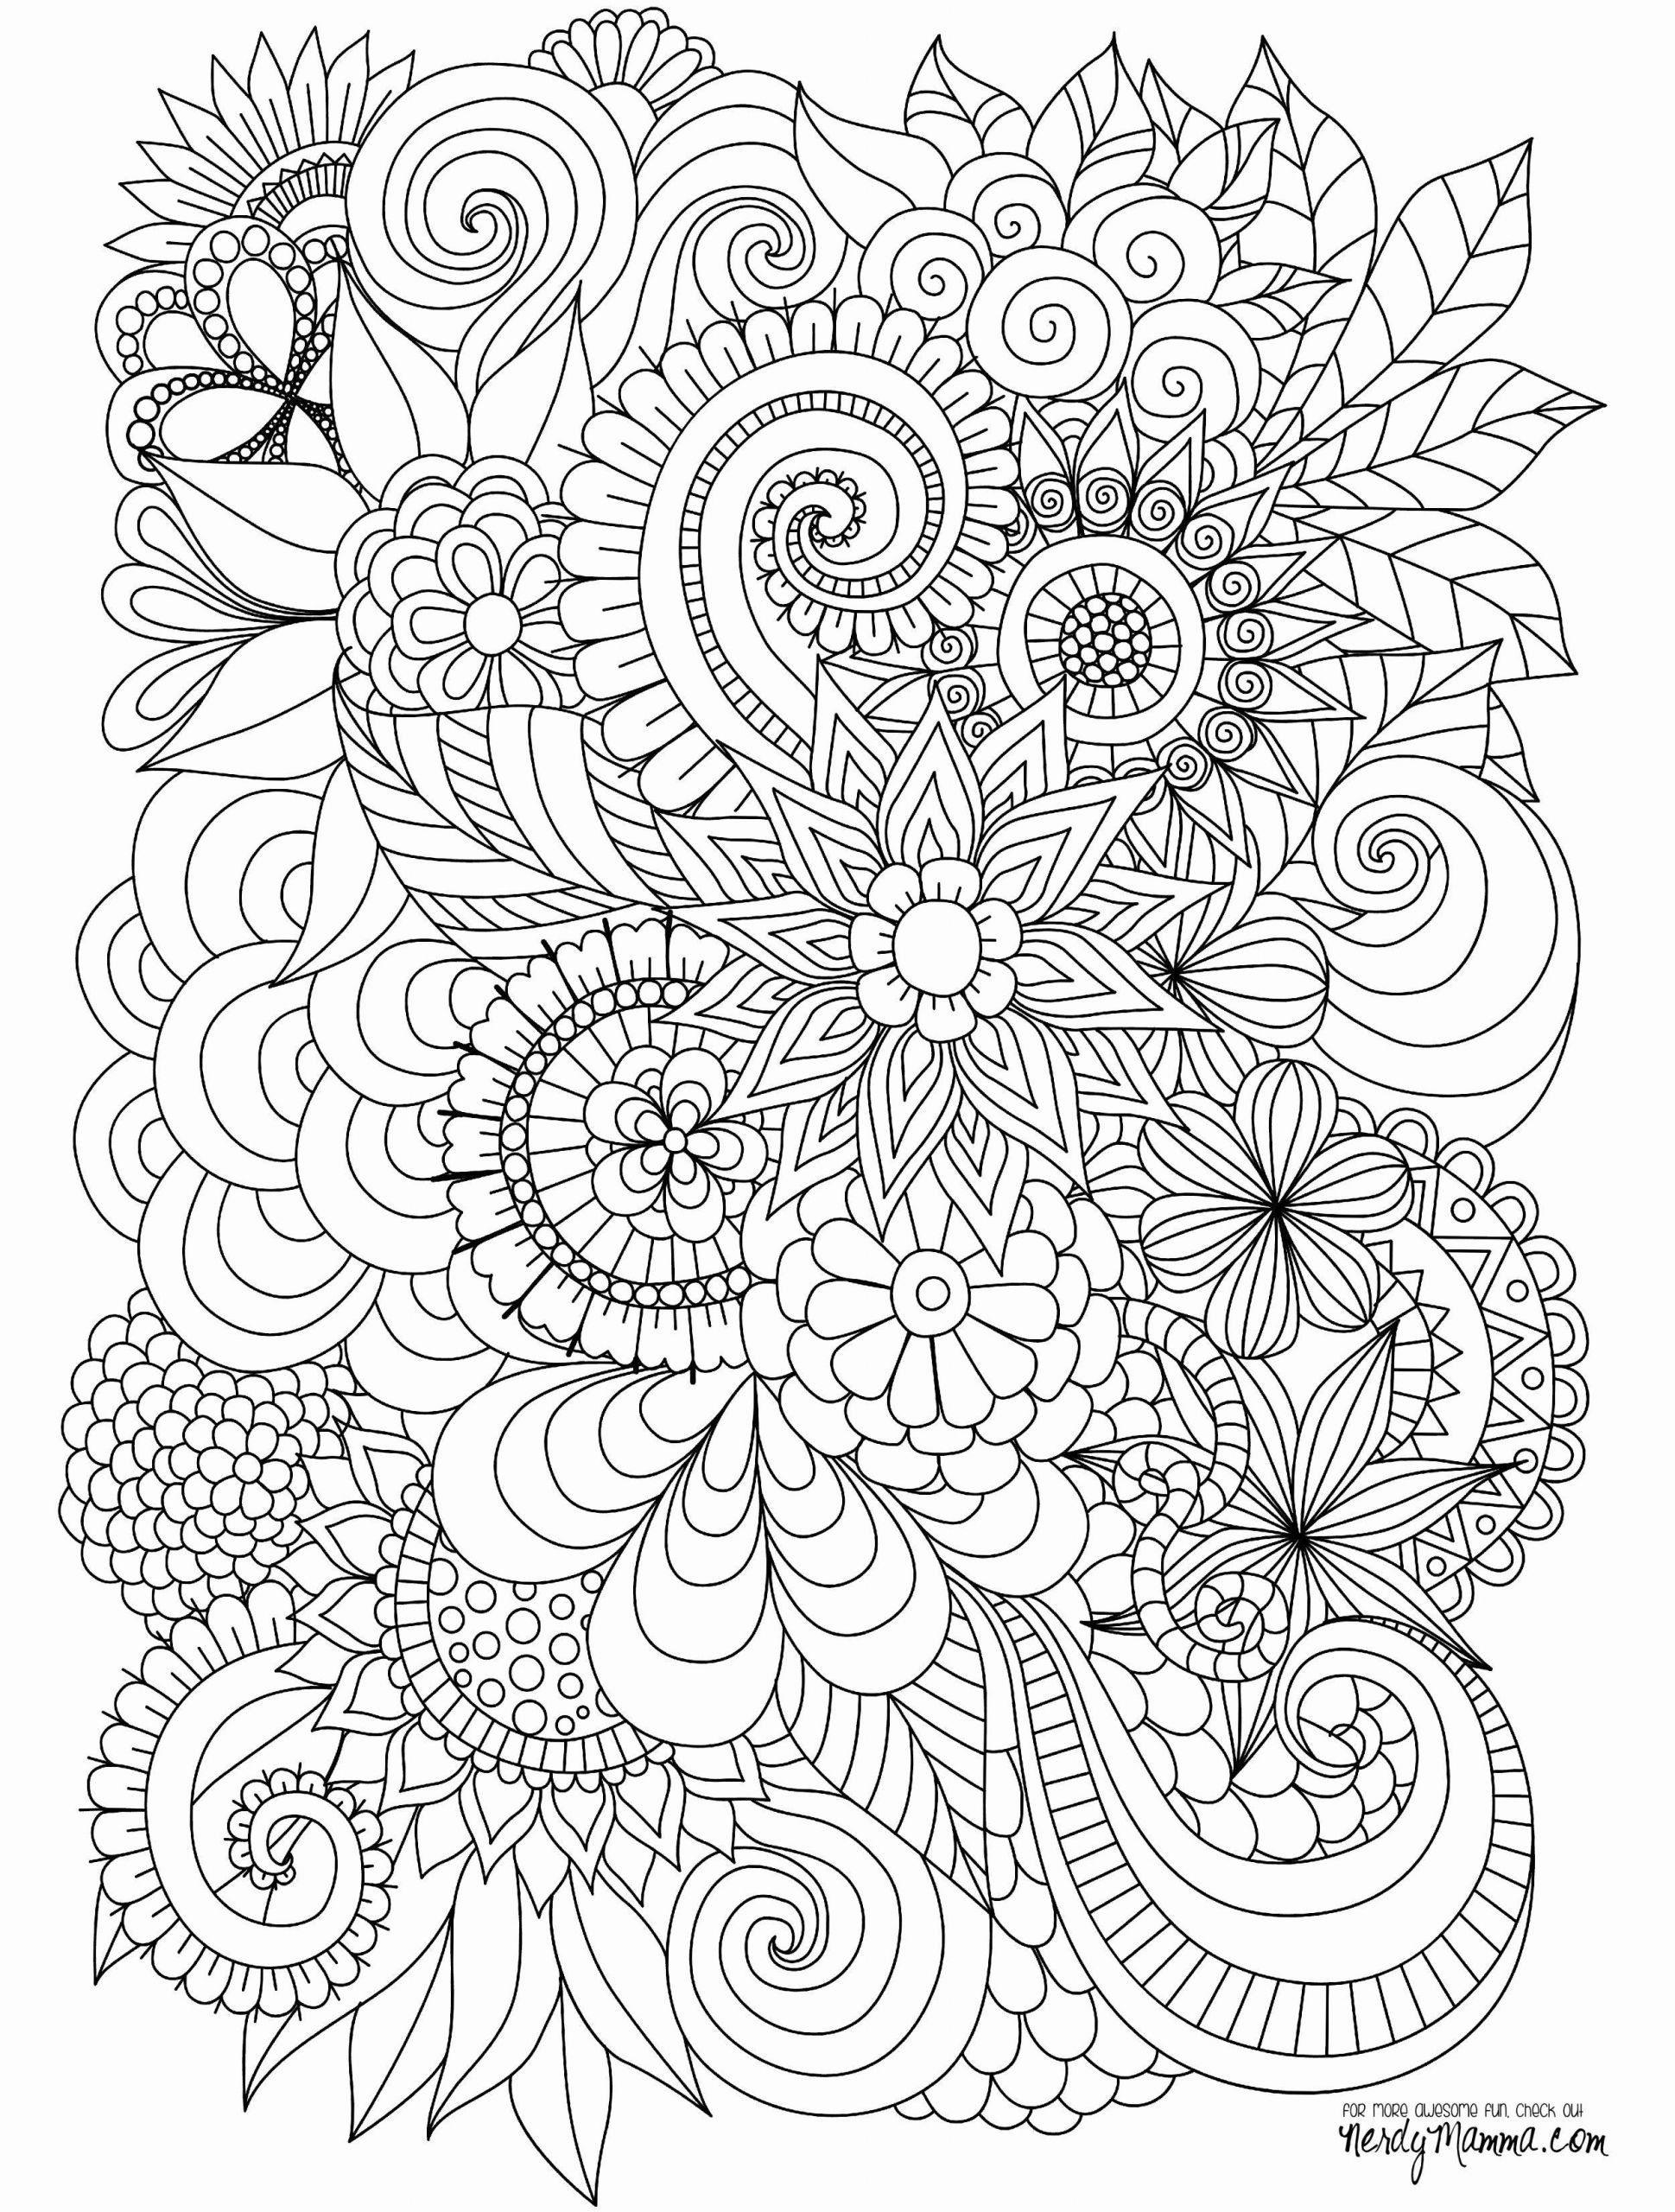 coloring pages : Interactive Coloring Pages For Adults Online New ...